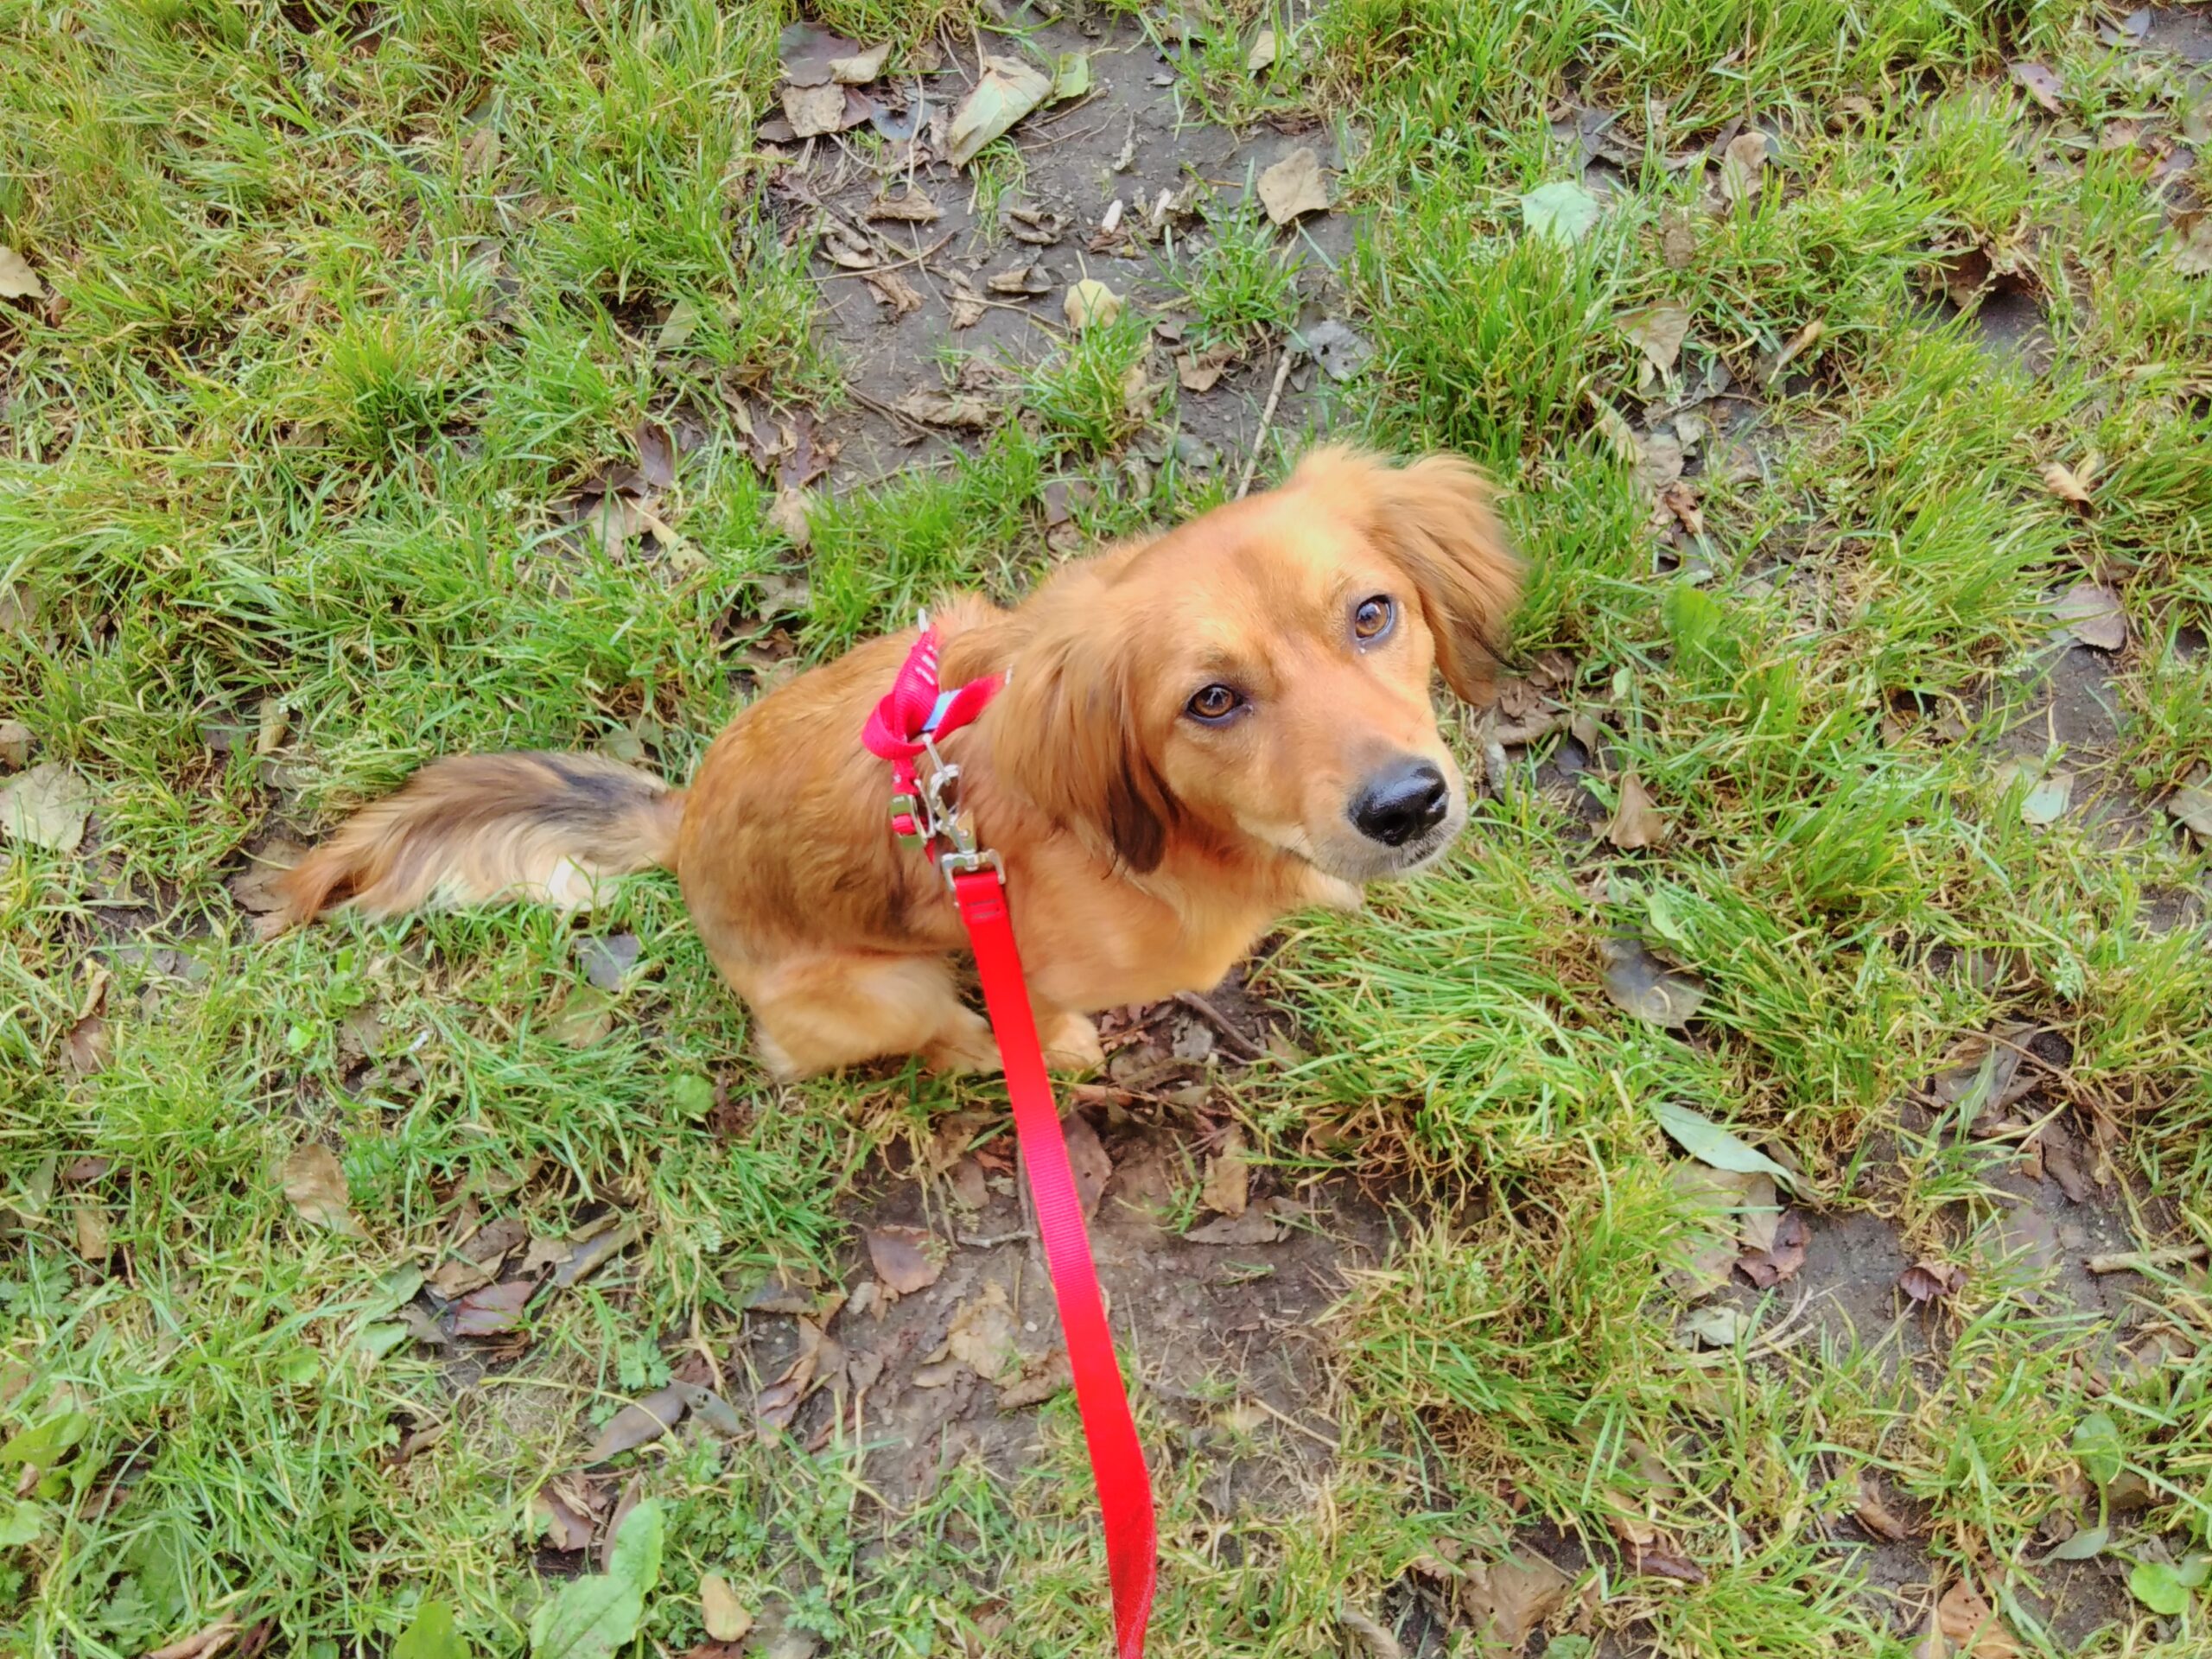 A blonde dog on a lead looks up at the camera.